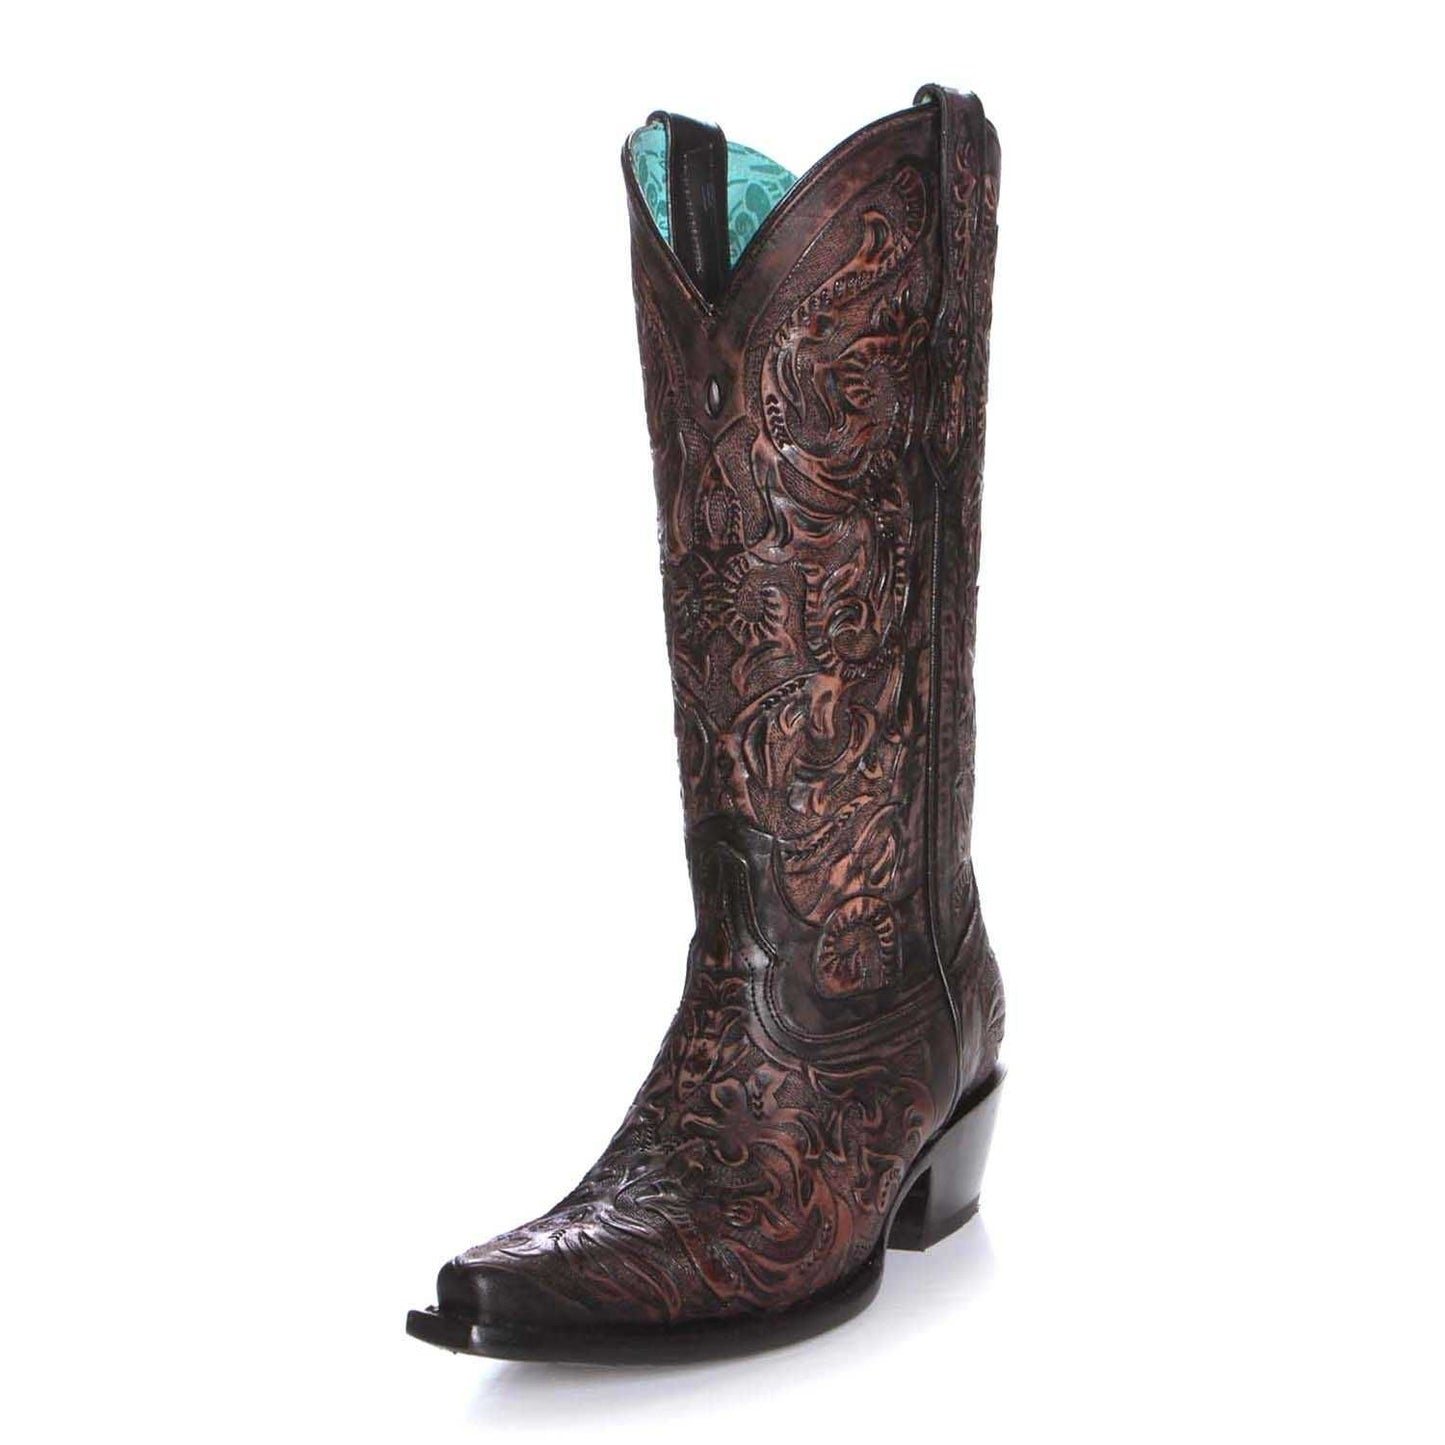 G1471-M Corral brown western cowgirl leather tall boots for women-Kuet.us